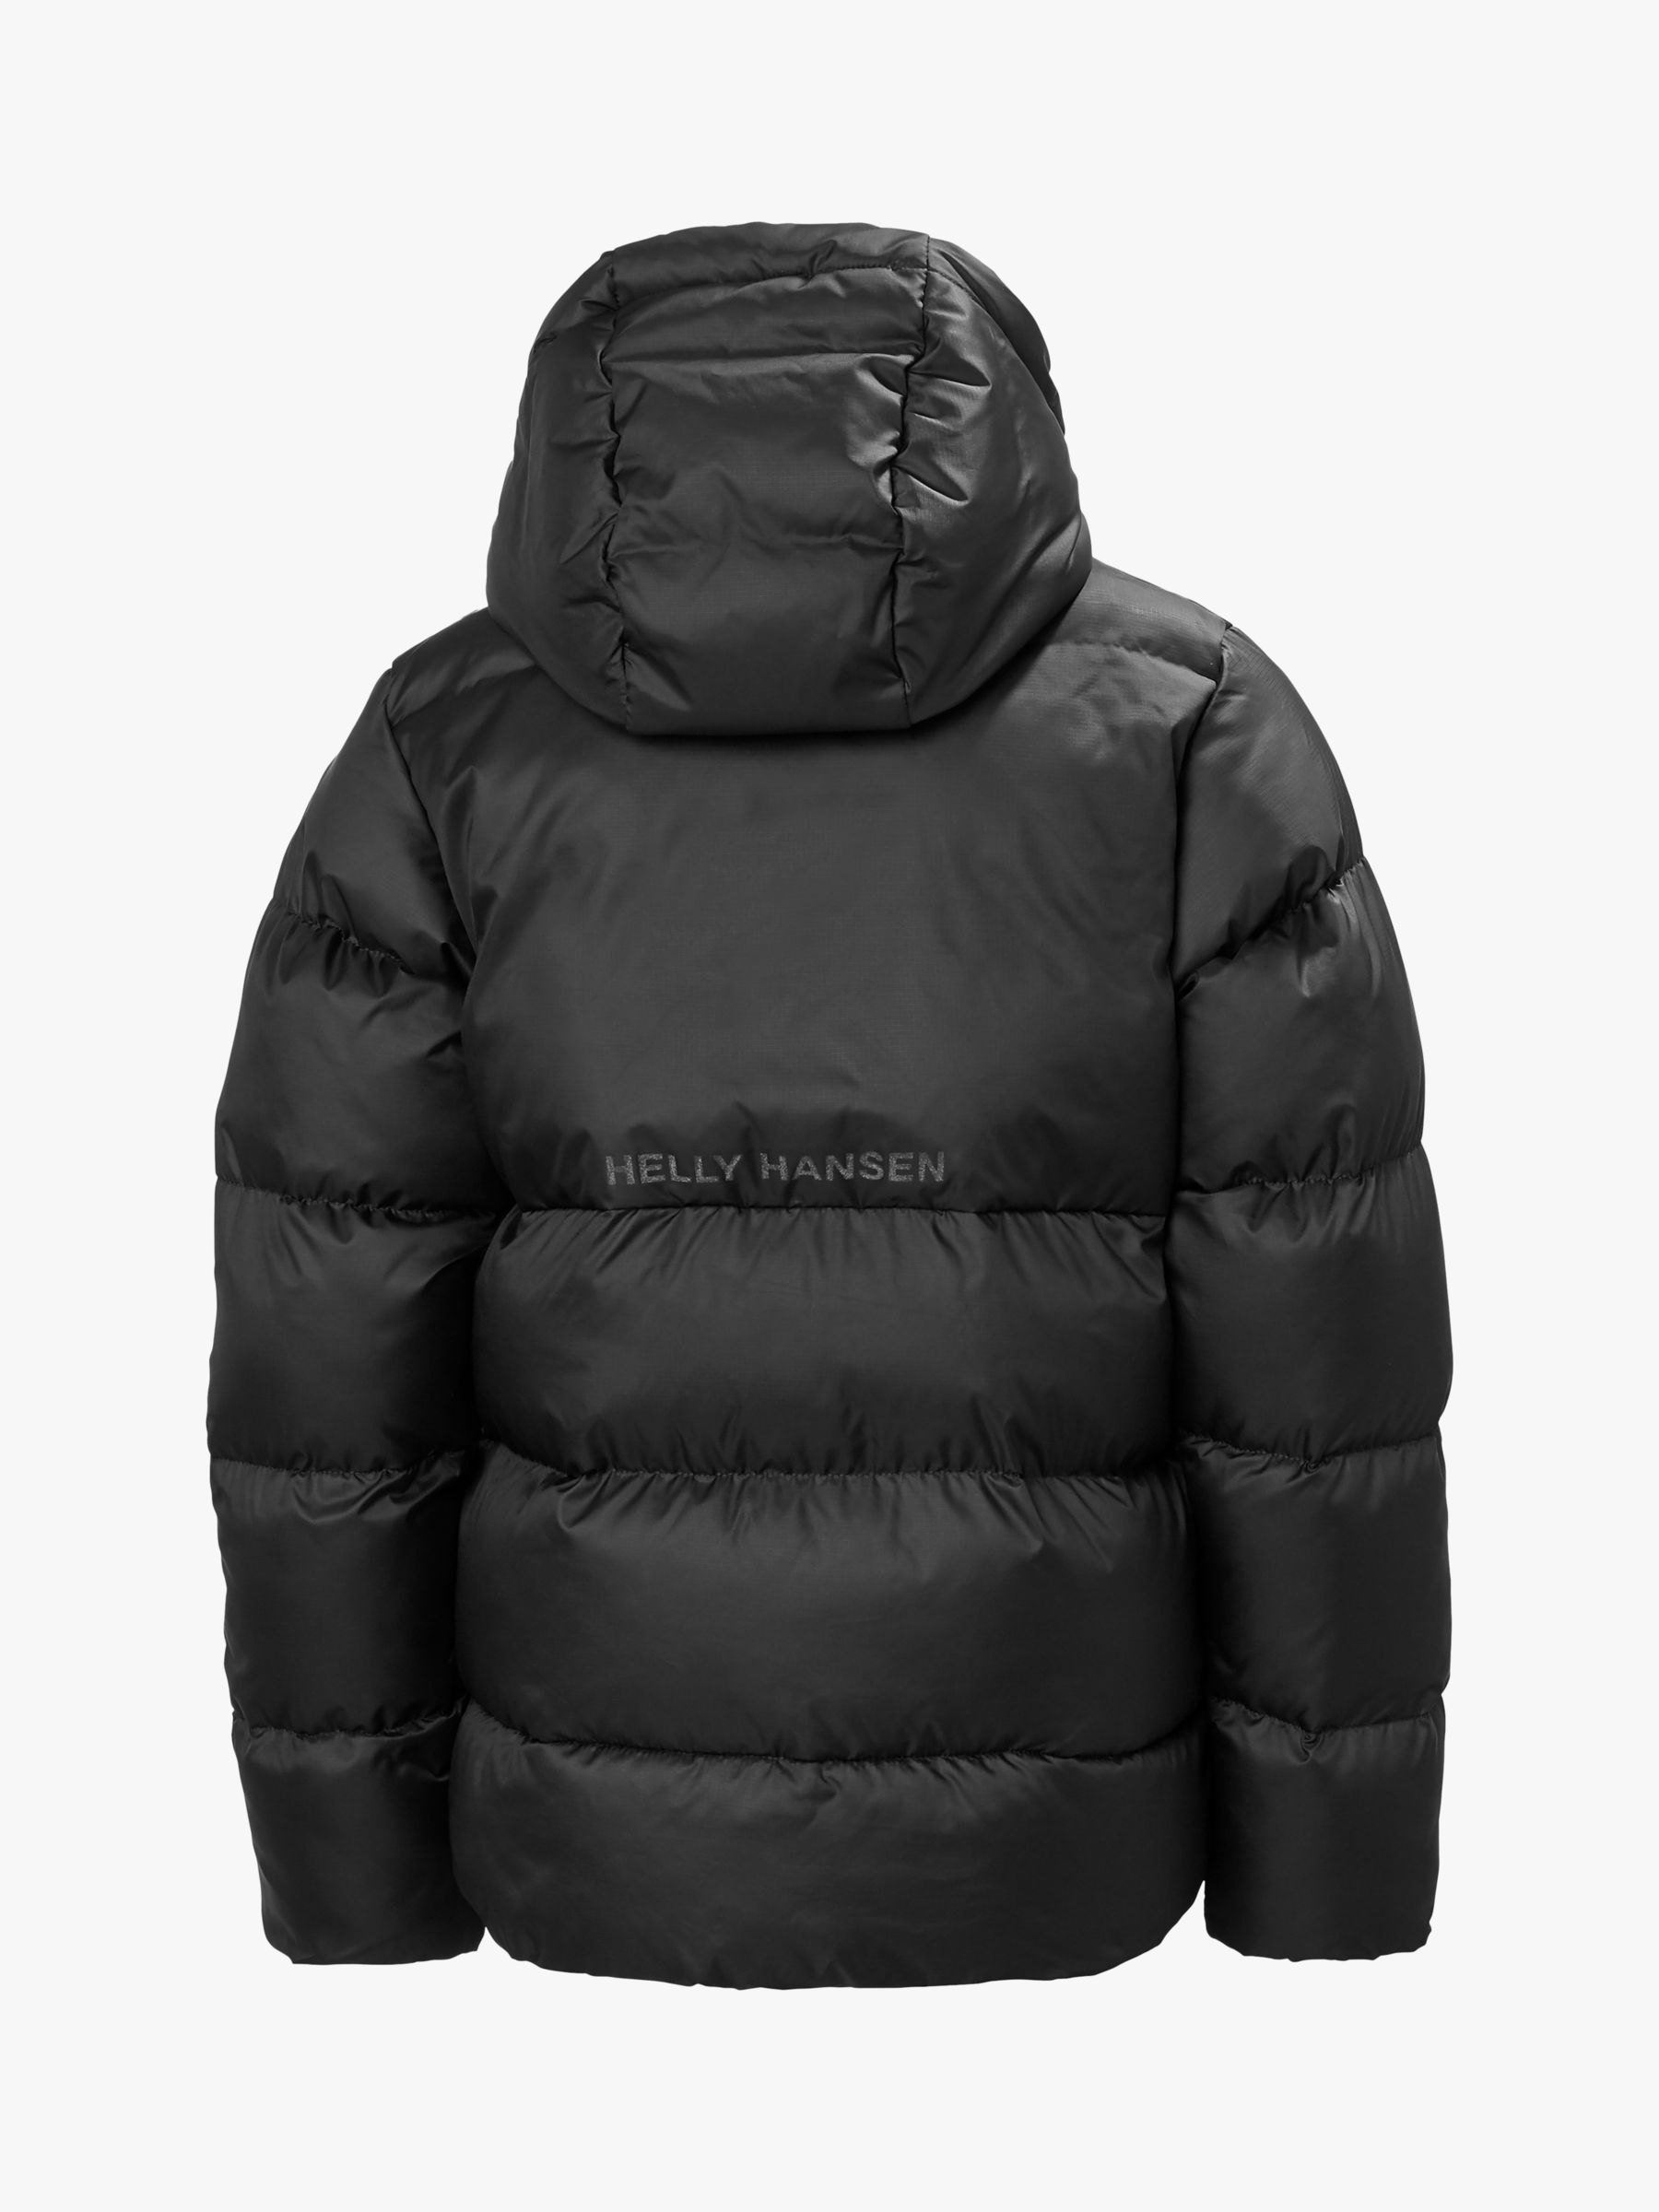 Helly Hansen Vision Puffy Jacket 8-14y - Clement